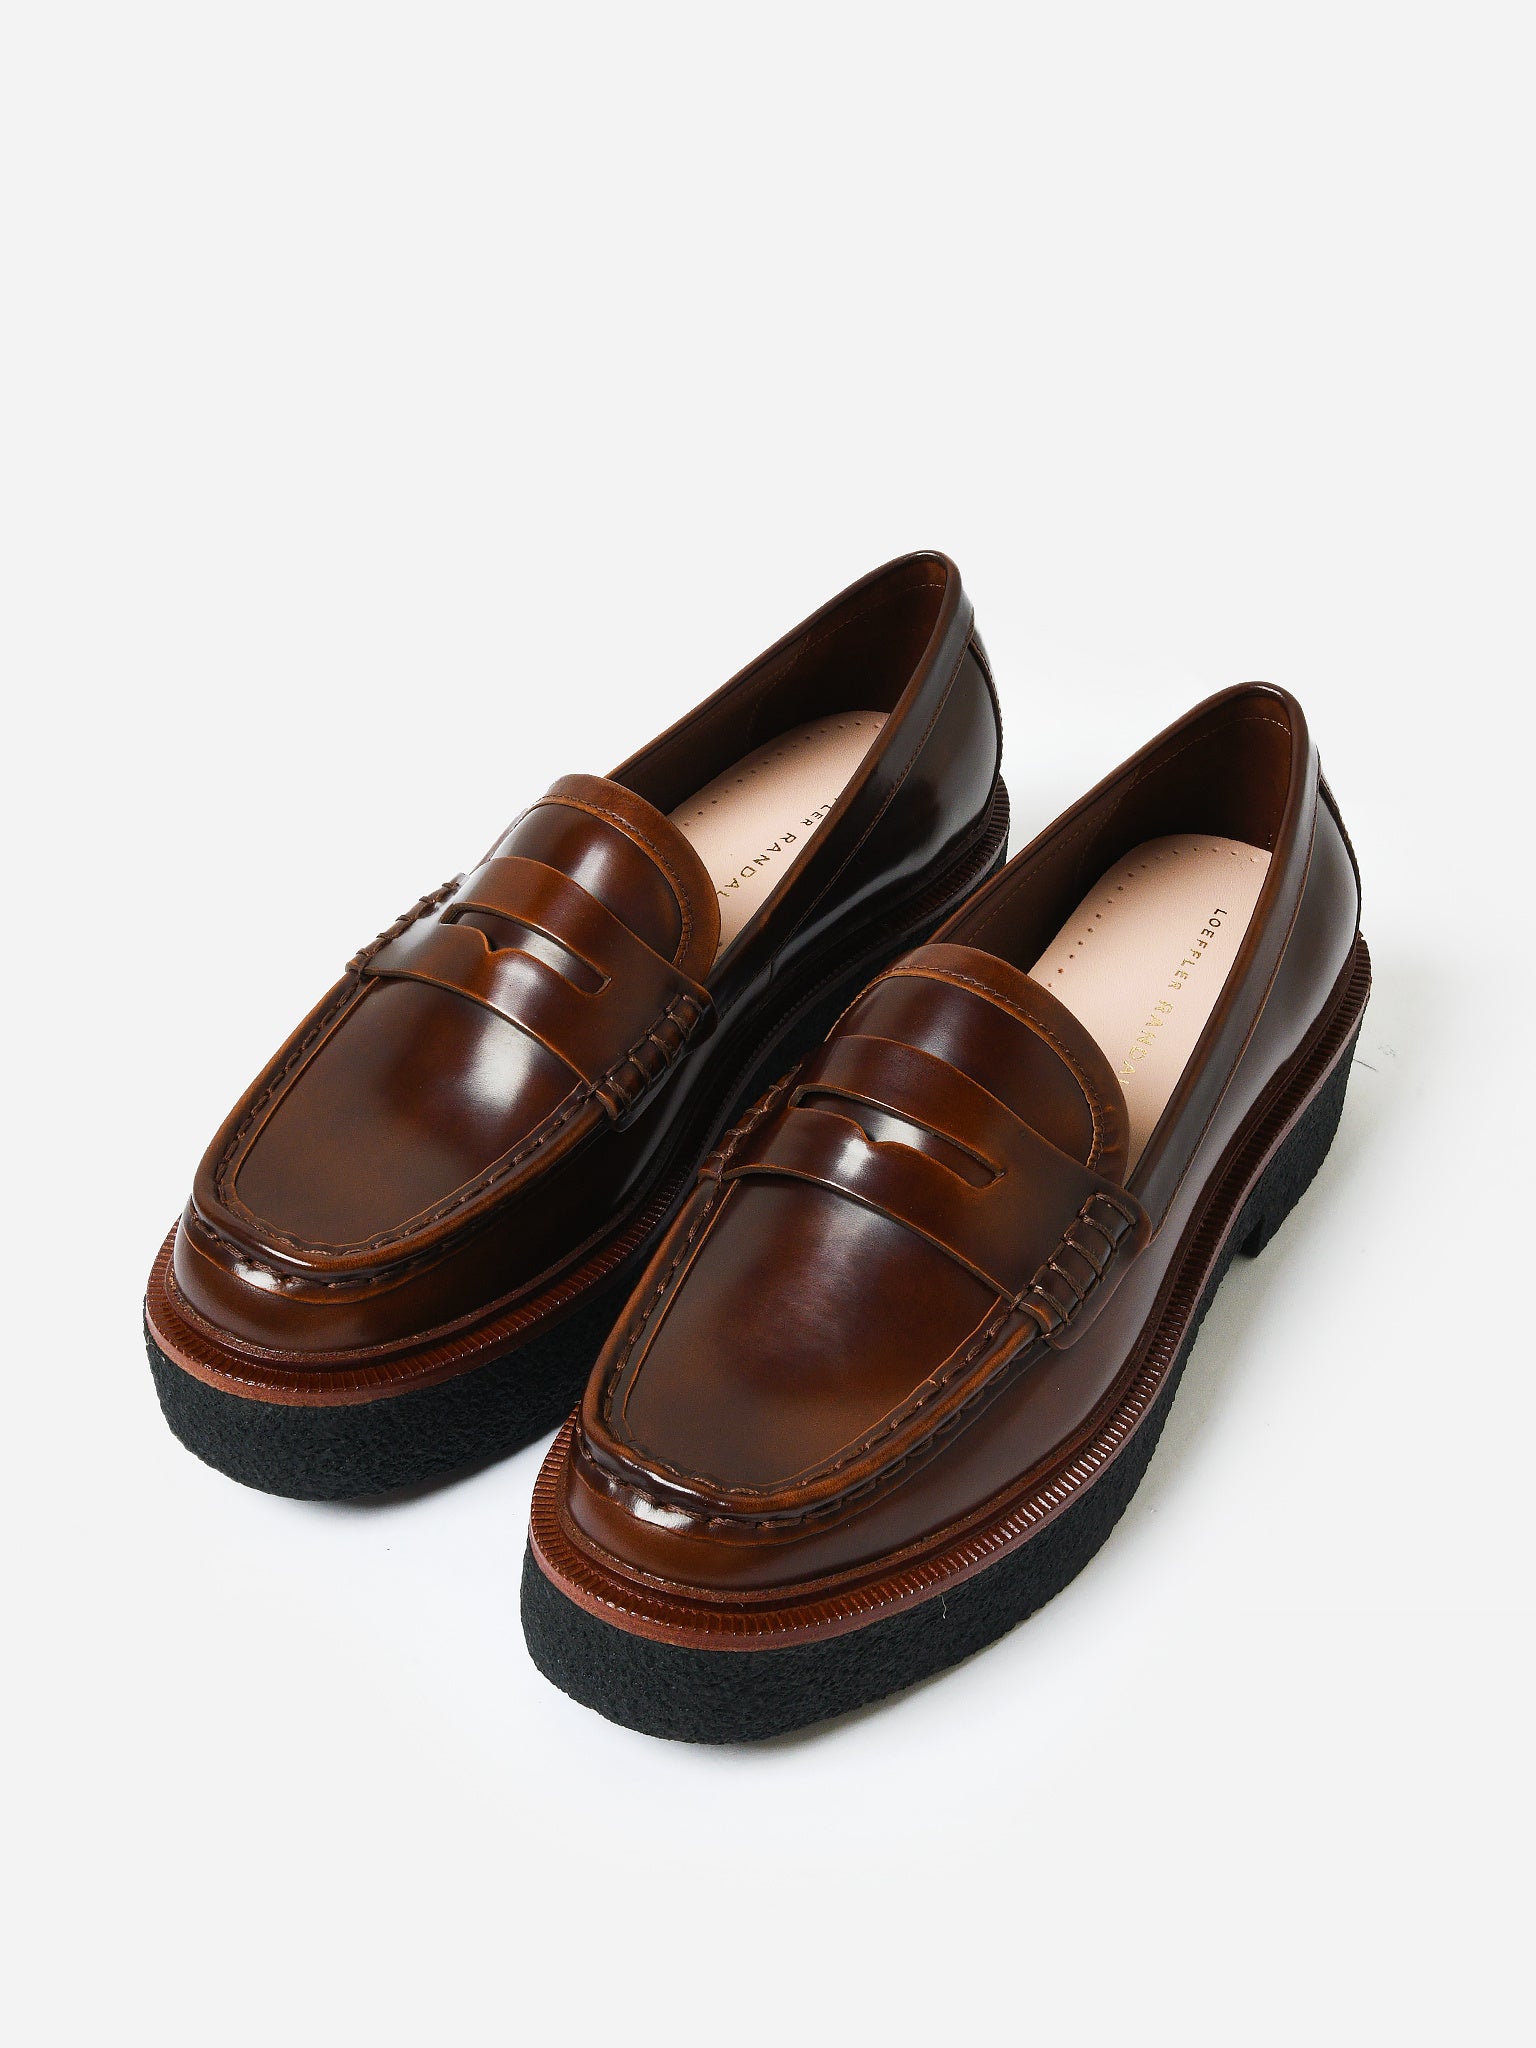 NB - Luxury Slippers Sandals Loafers - LU-V - 949 in 2023